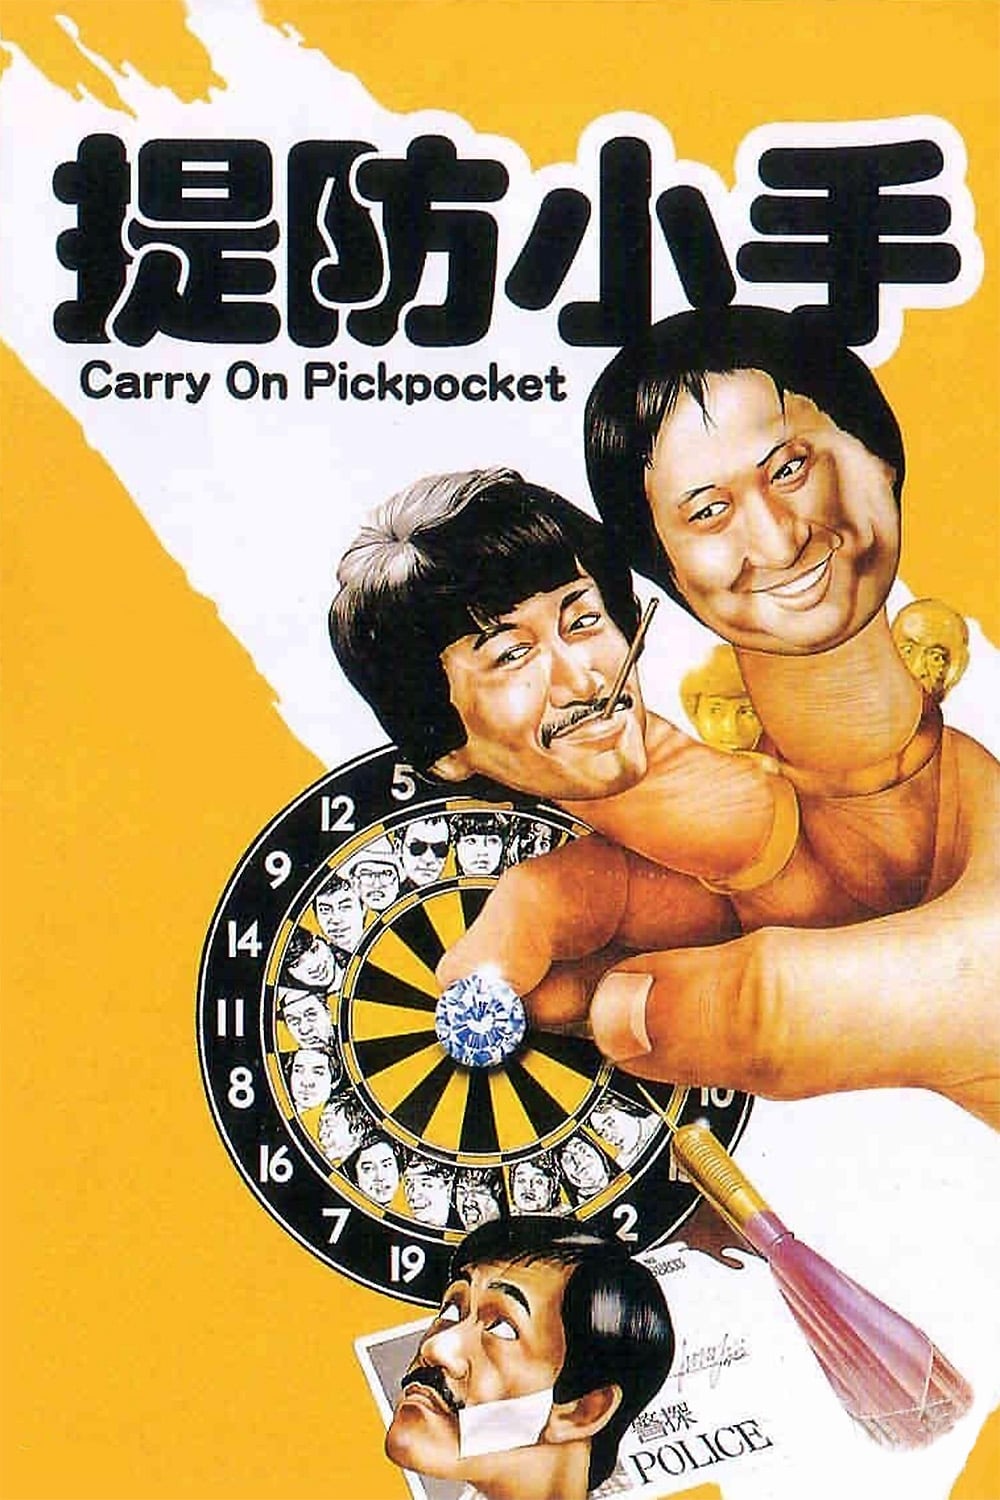 Carry on Pickpocket (1982)